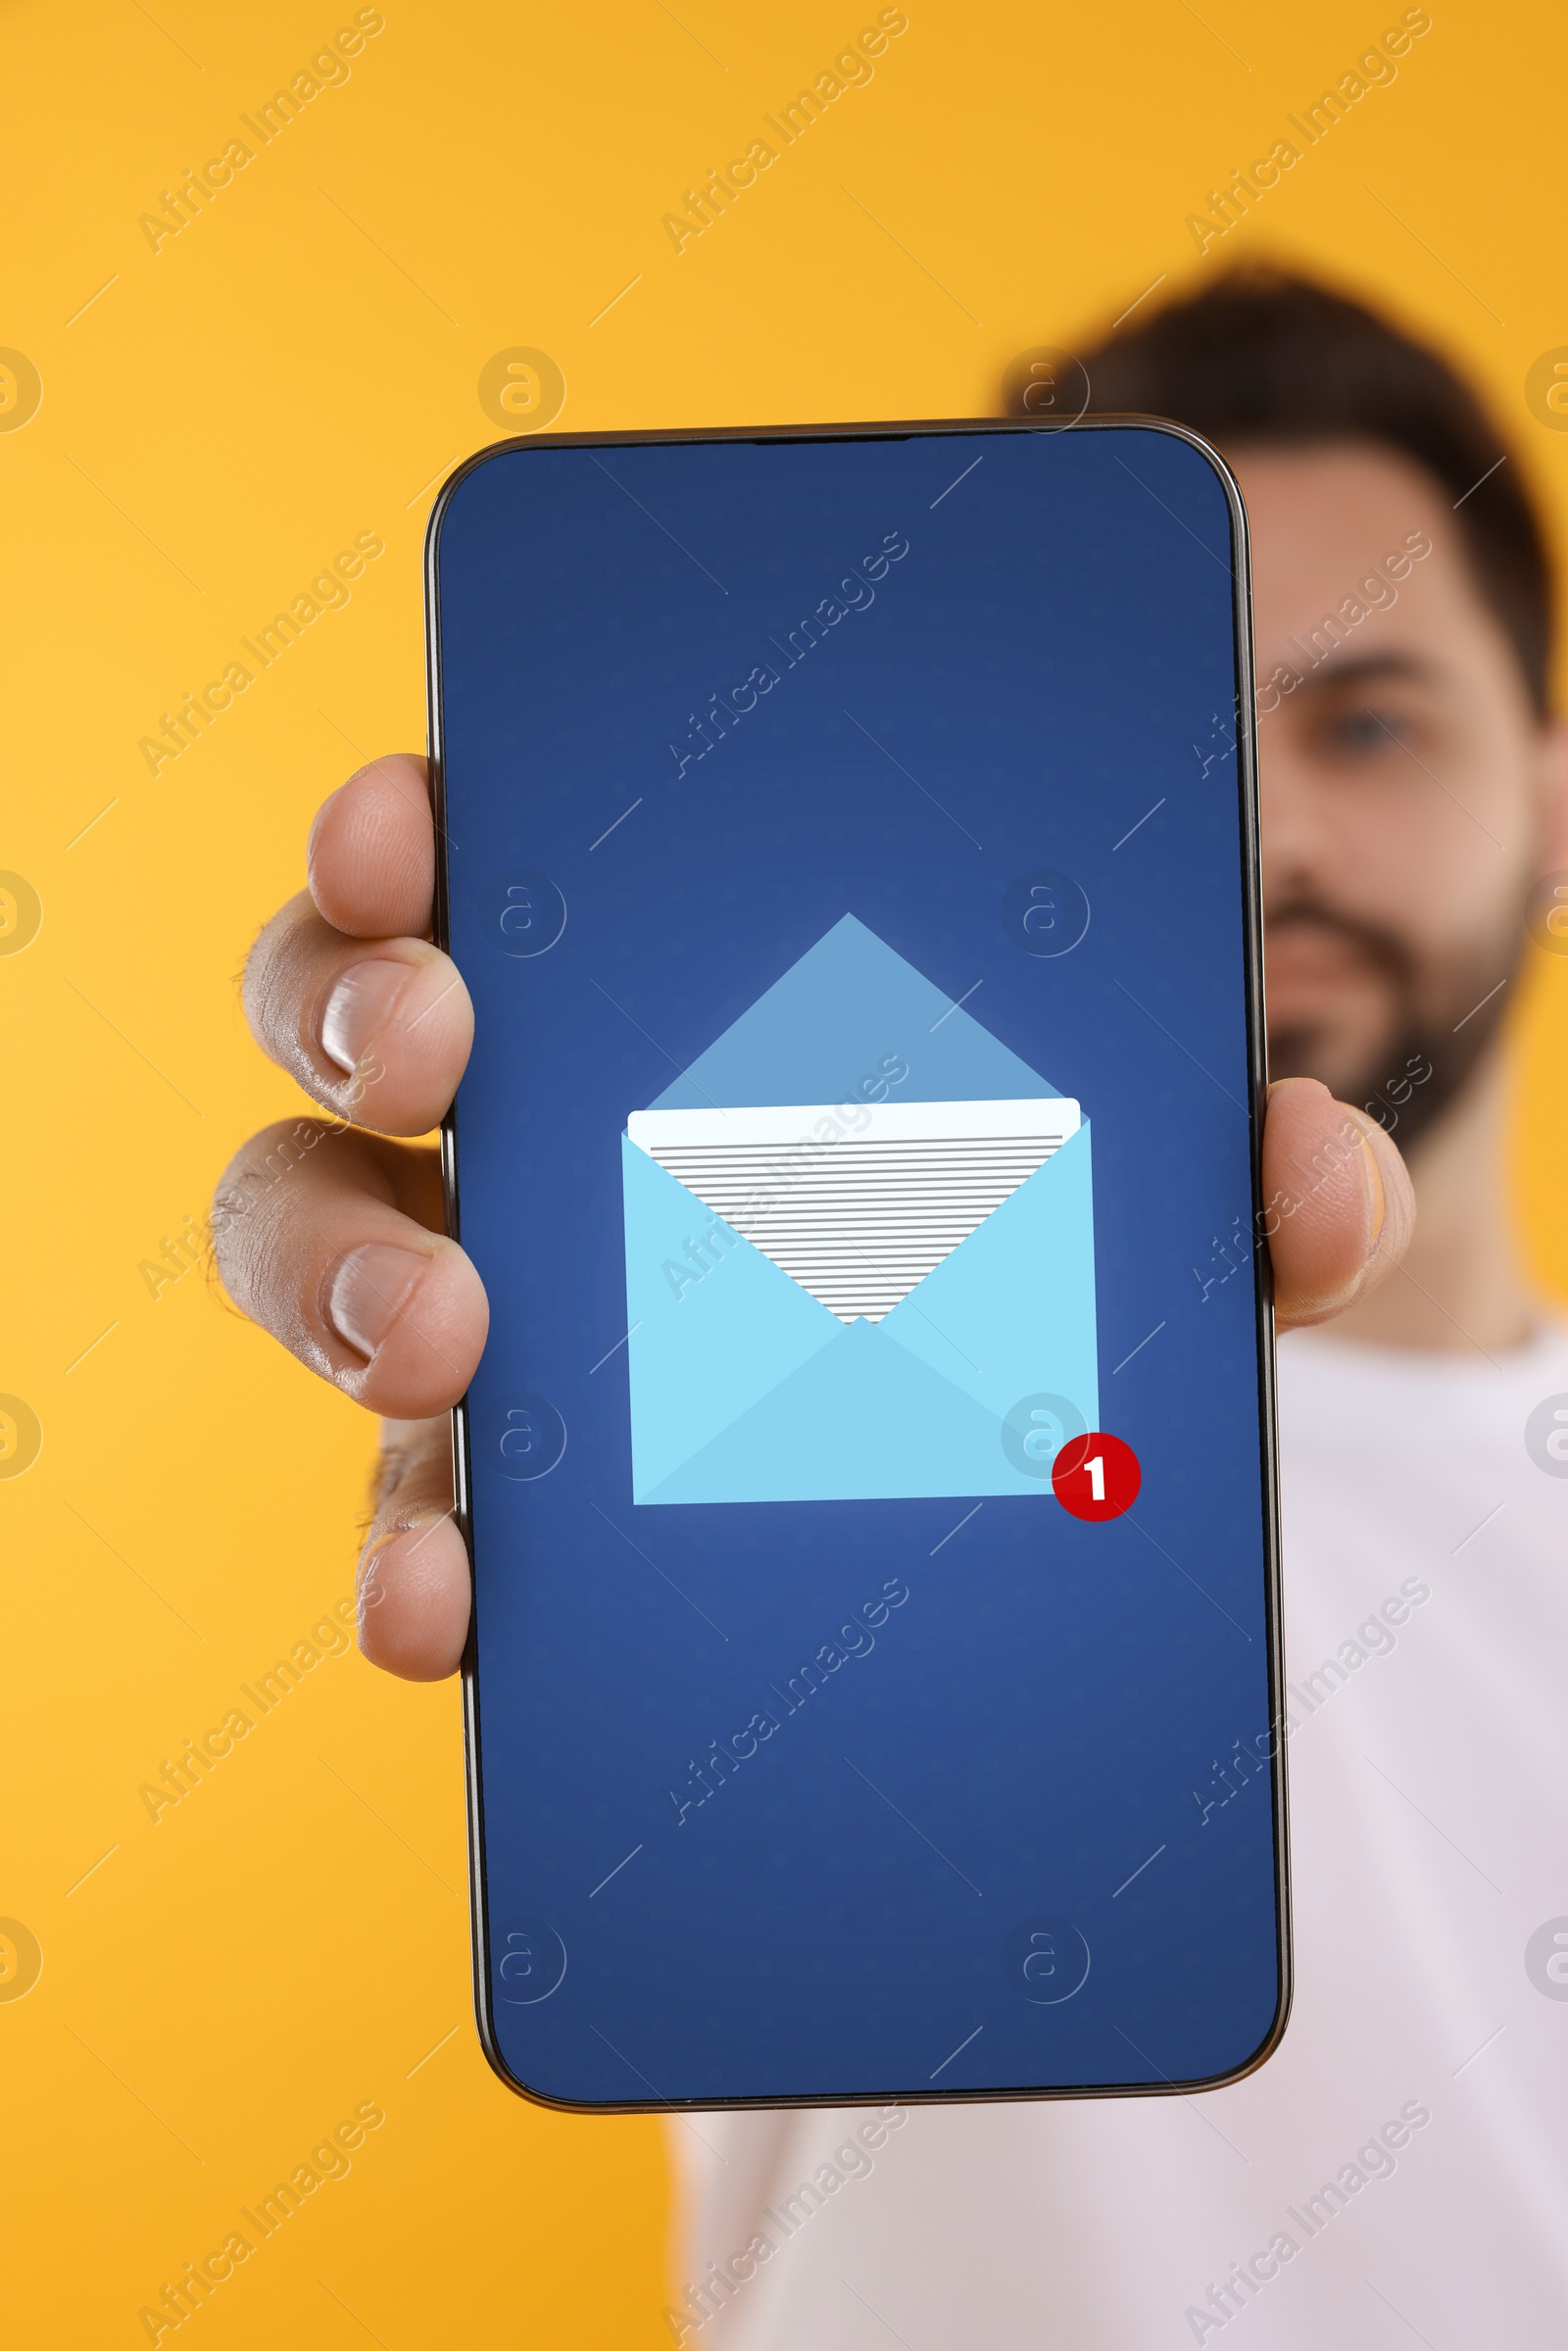 Image of Man showing mobile phone with new message notification on screen against yellow background, selective focus